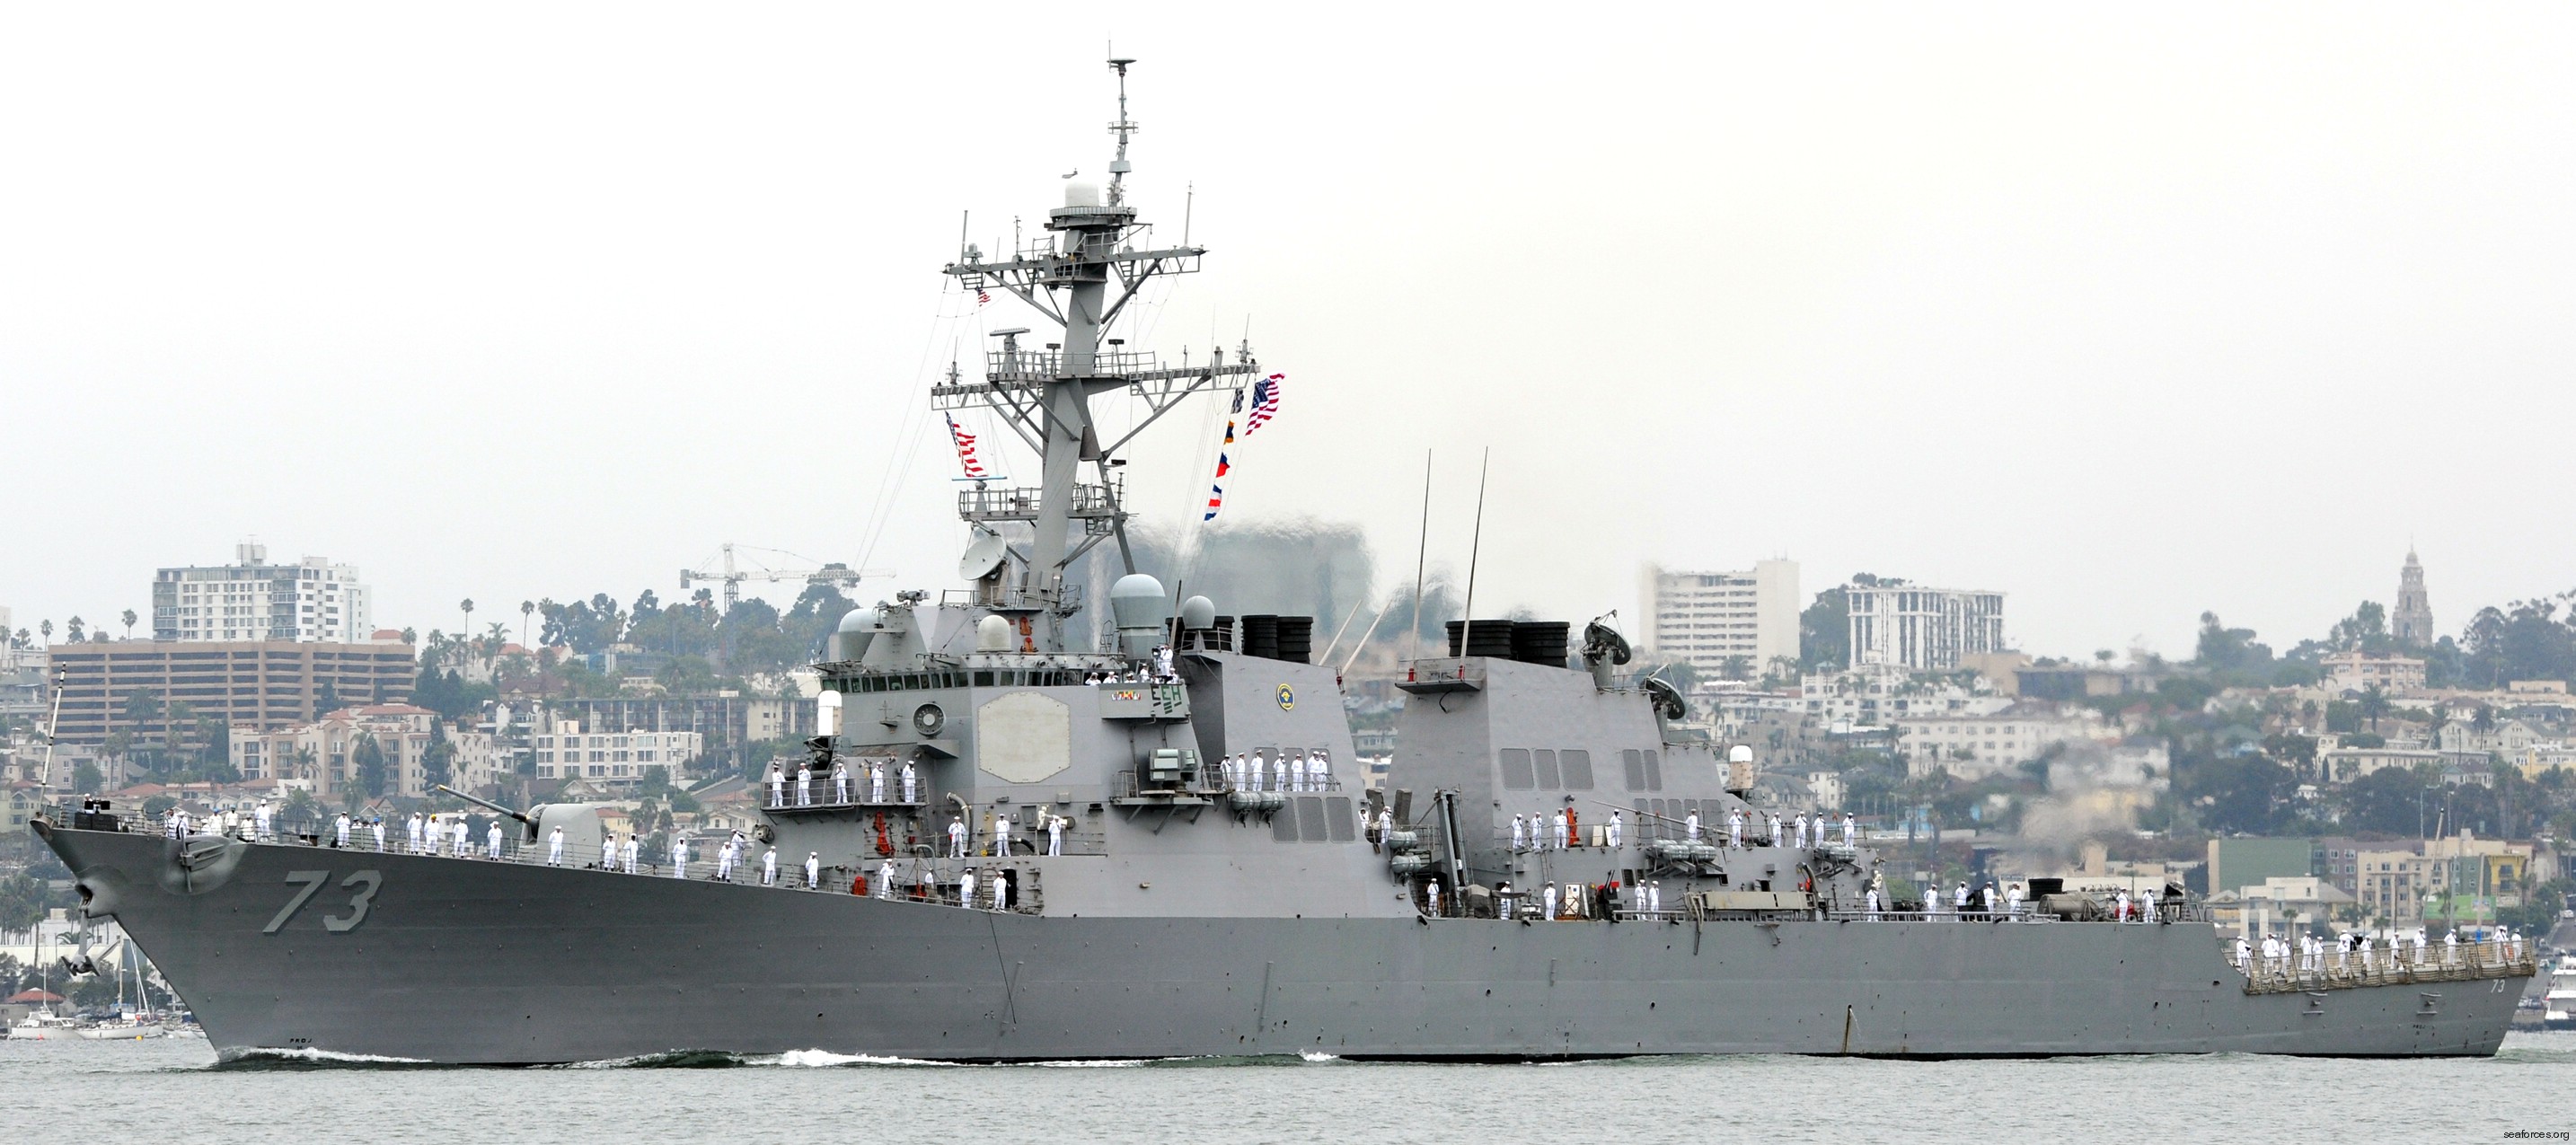 ddg-73 uss decatur guided missile destroyer arleigh burke class aegis bmd 29